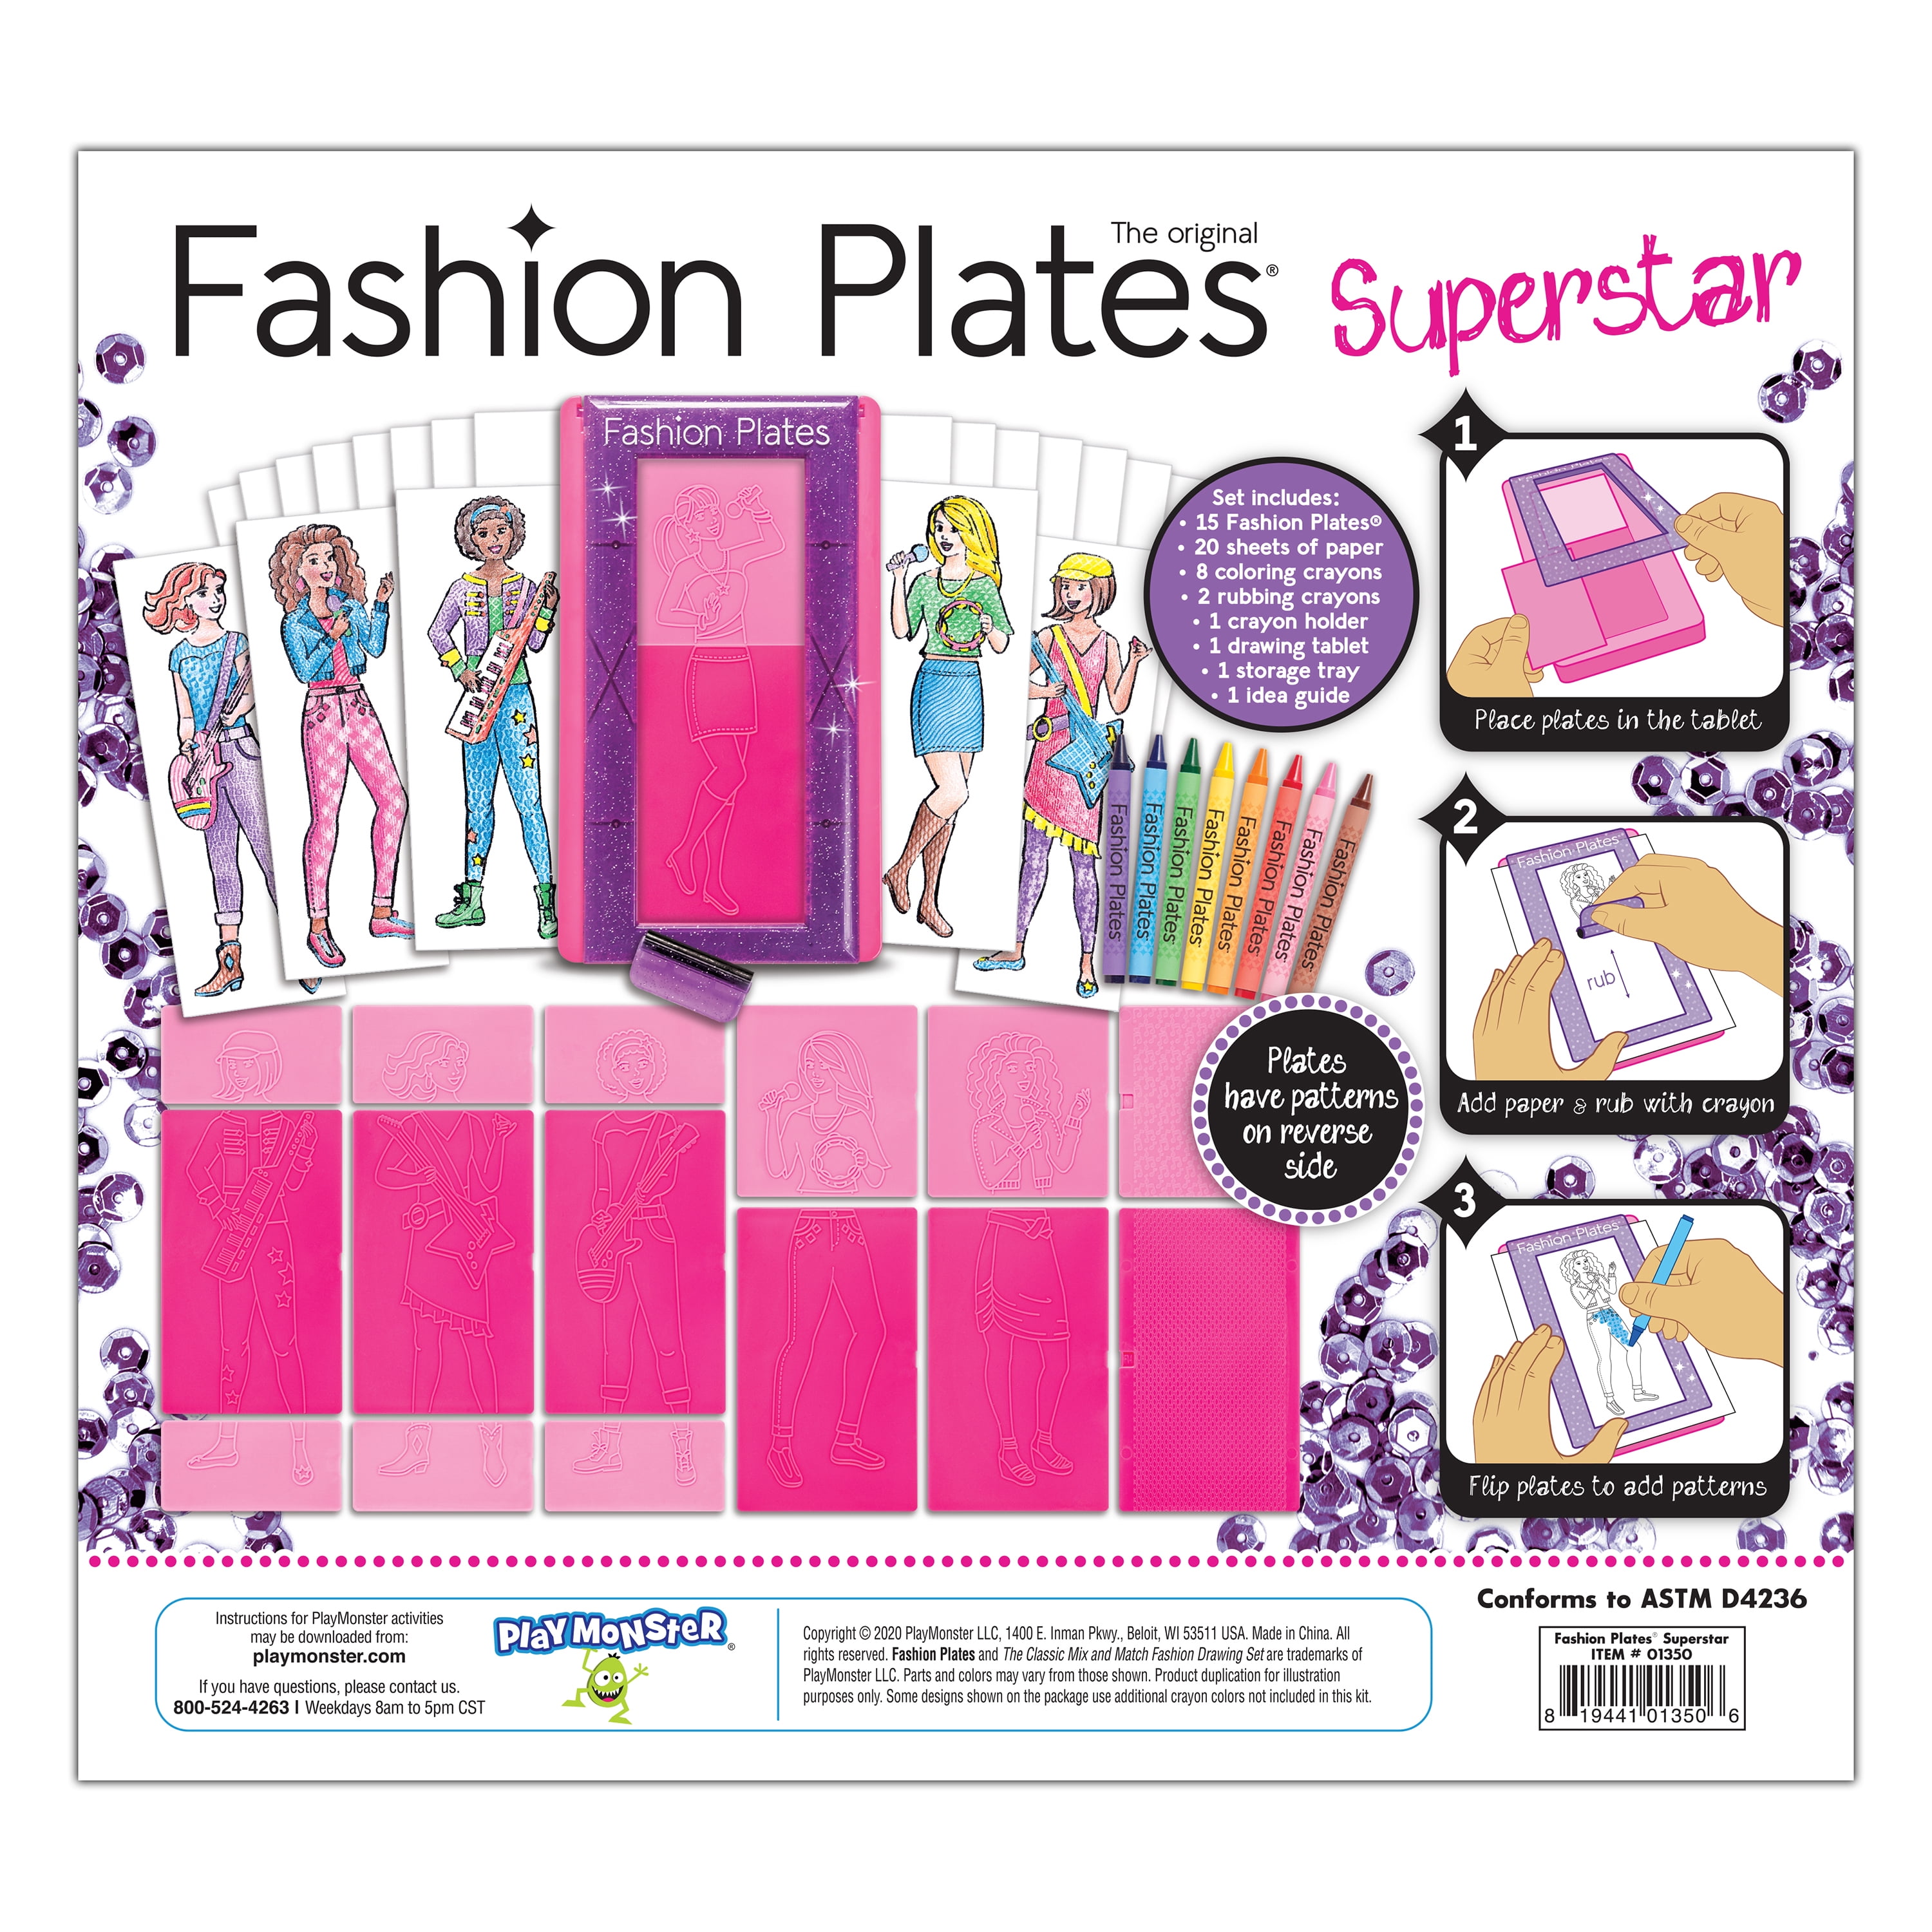 Barbie Fashion Plates All-In-One Studio 45 Pieces design drawing